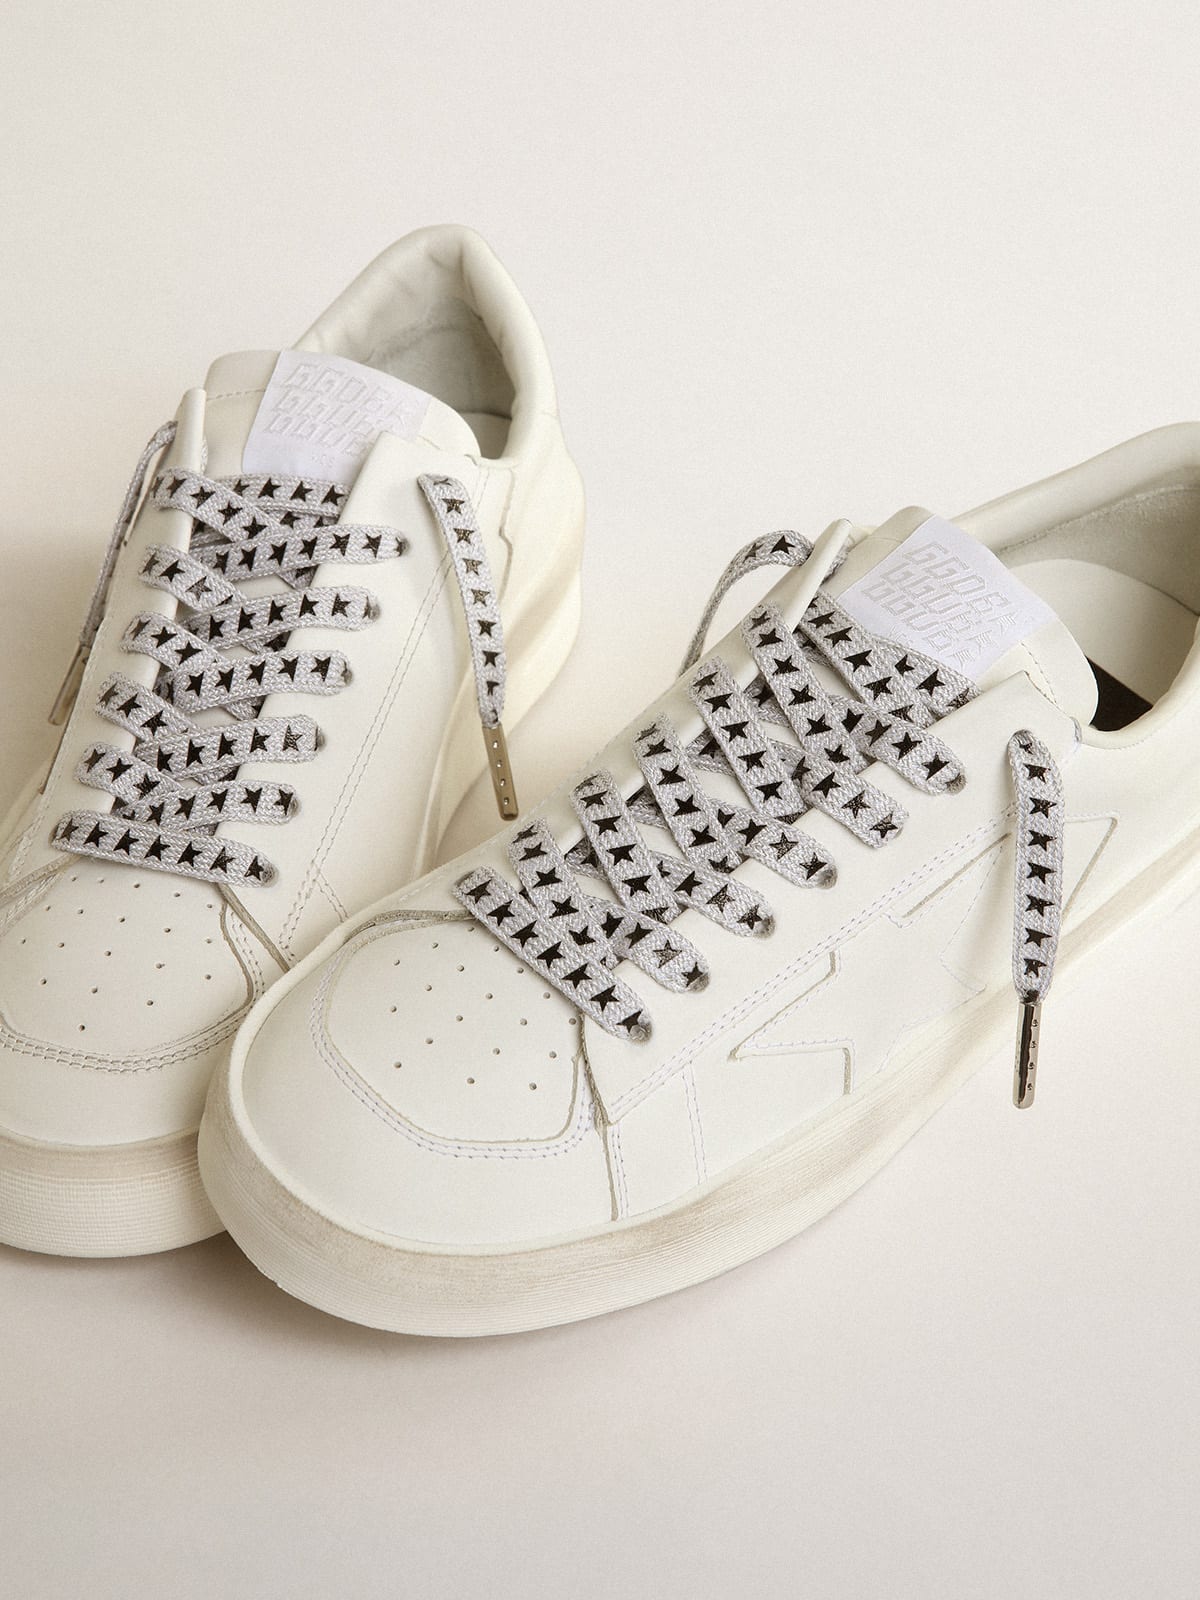 Golden Goose - Ice-colored laces with contrasting black stars in 